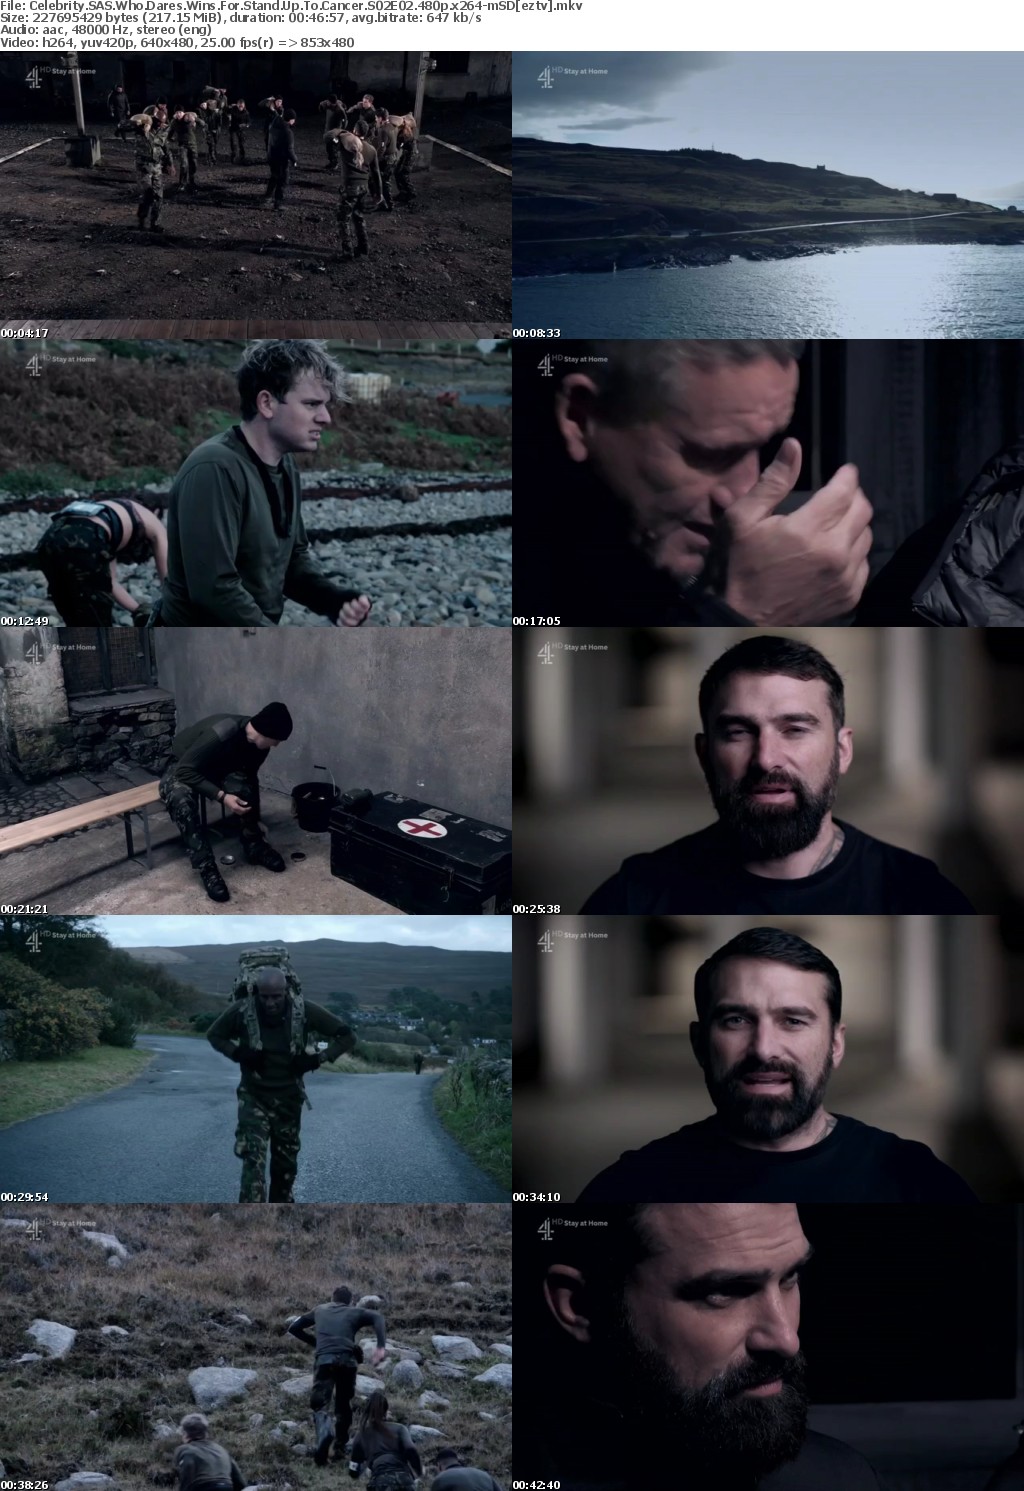 Celebrity SAS Who Dares Wins For Stand Up To Cancer S02E02 480p x264-mSD